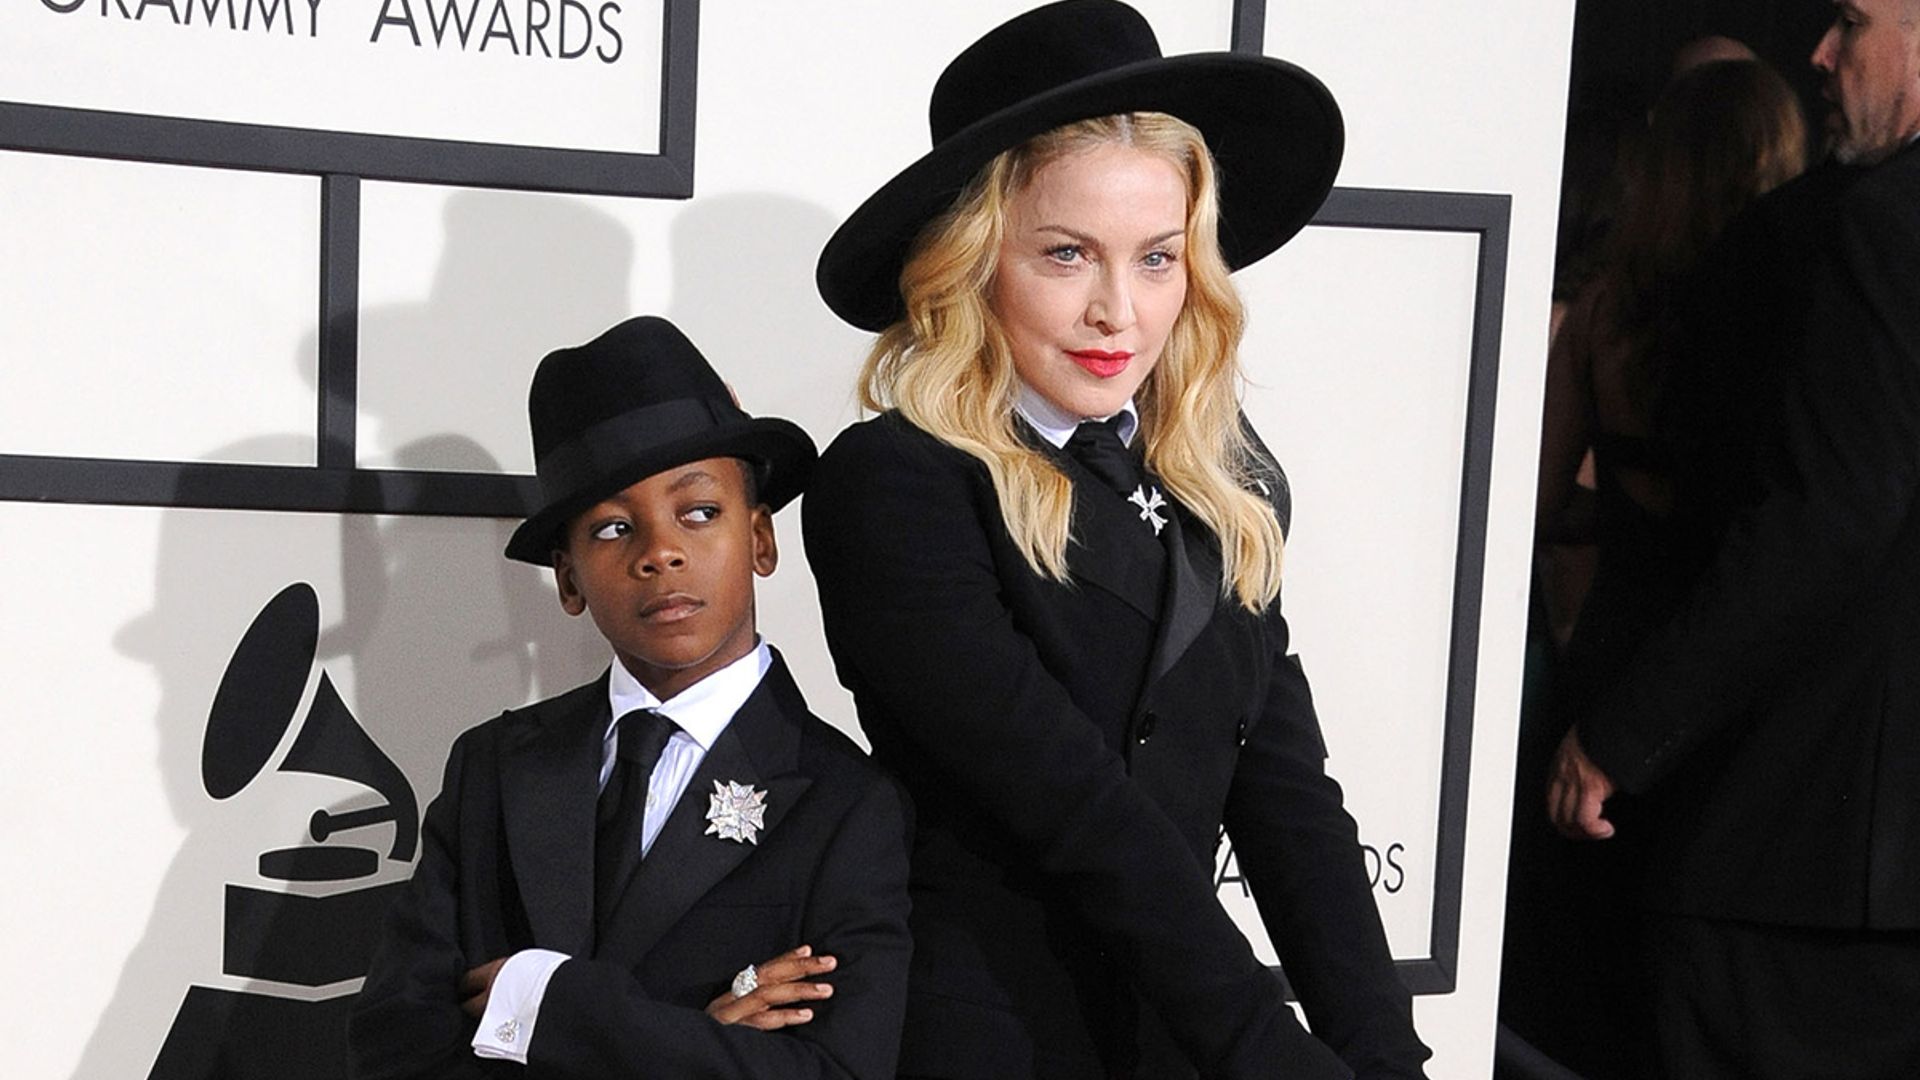 Madonna treated to home-cooked meal by son David Banda in sweet video